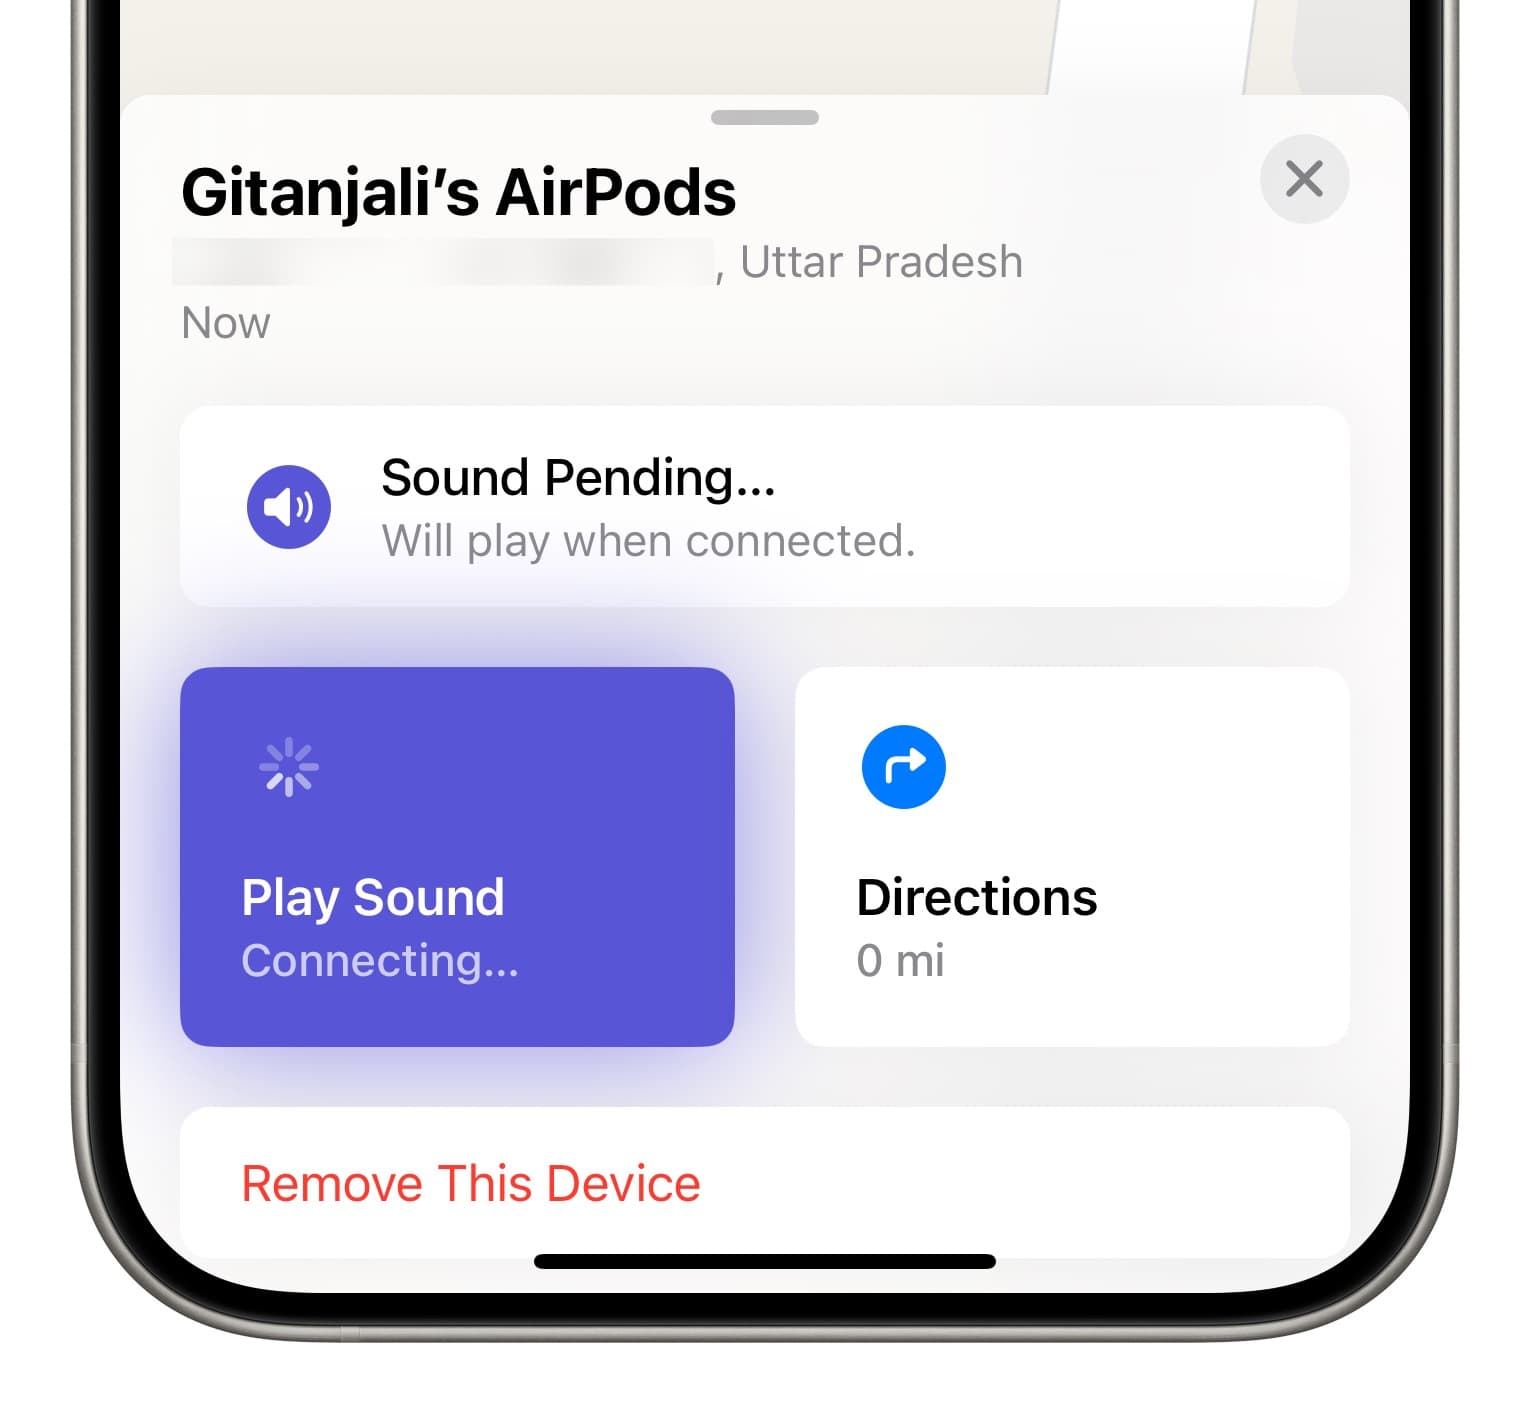 Sound Pending Will play when connected message for AirPod in Find My app